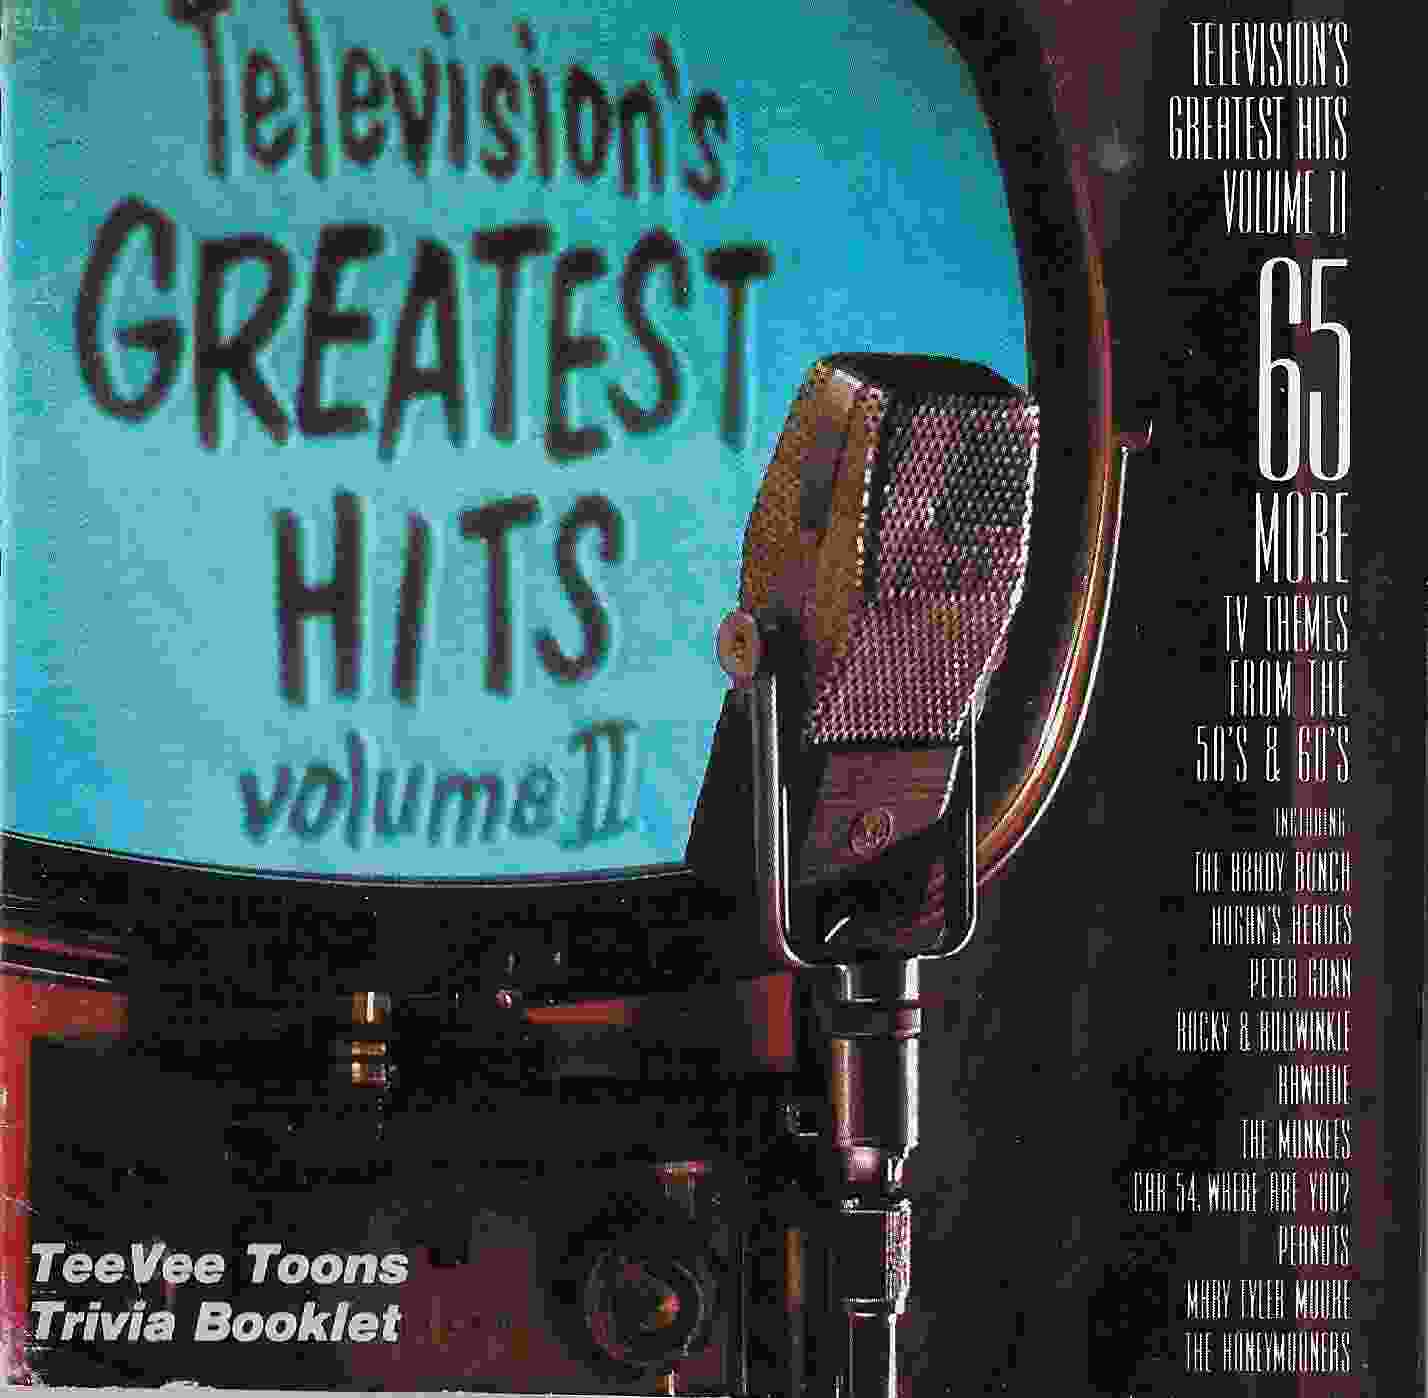 Picture of Television's greatest hits - Volume 2 by artist Various from ITV, Channel 4 and Channel 5 cds library